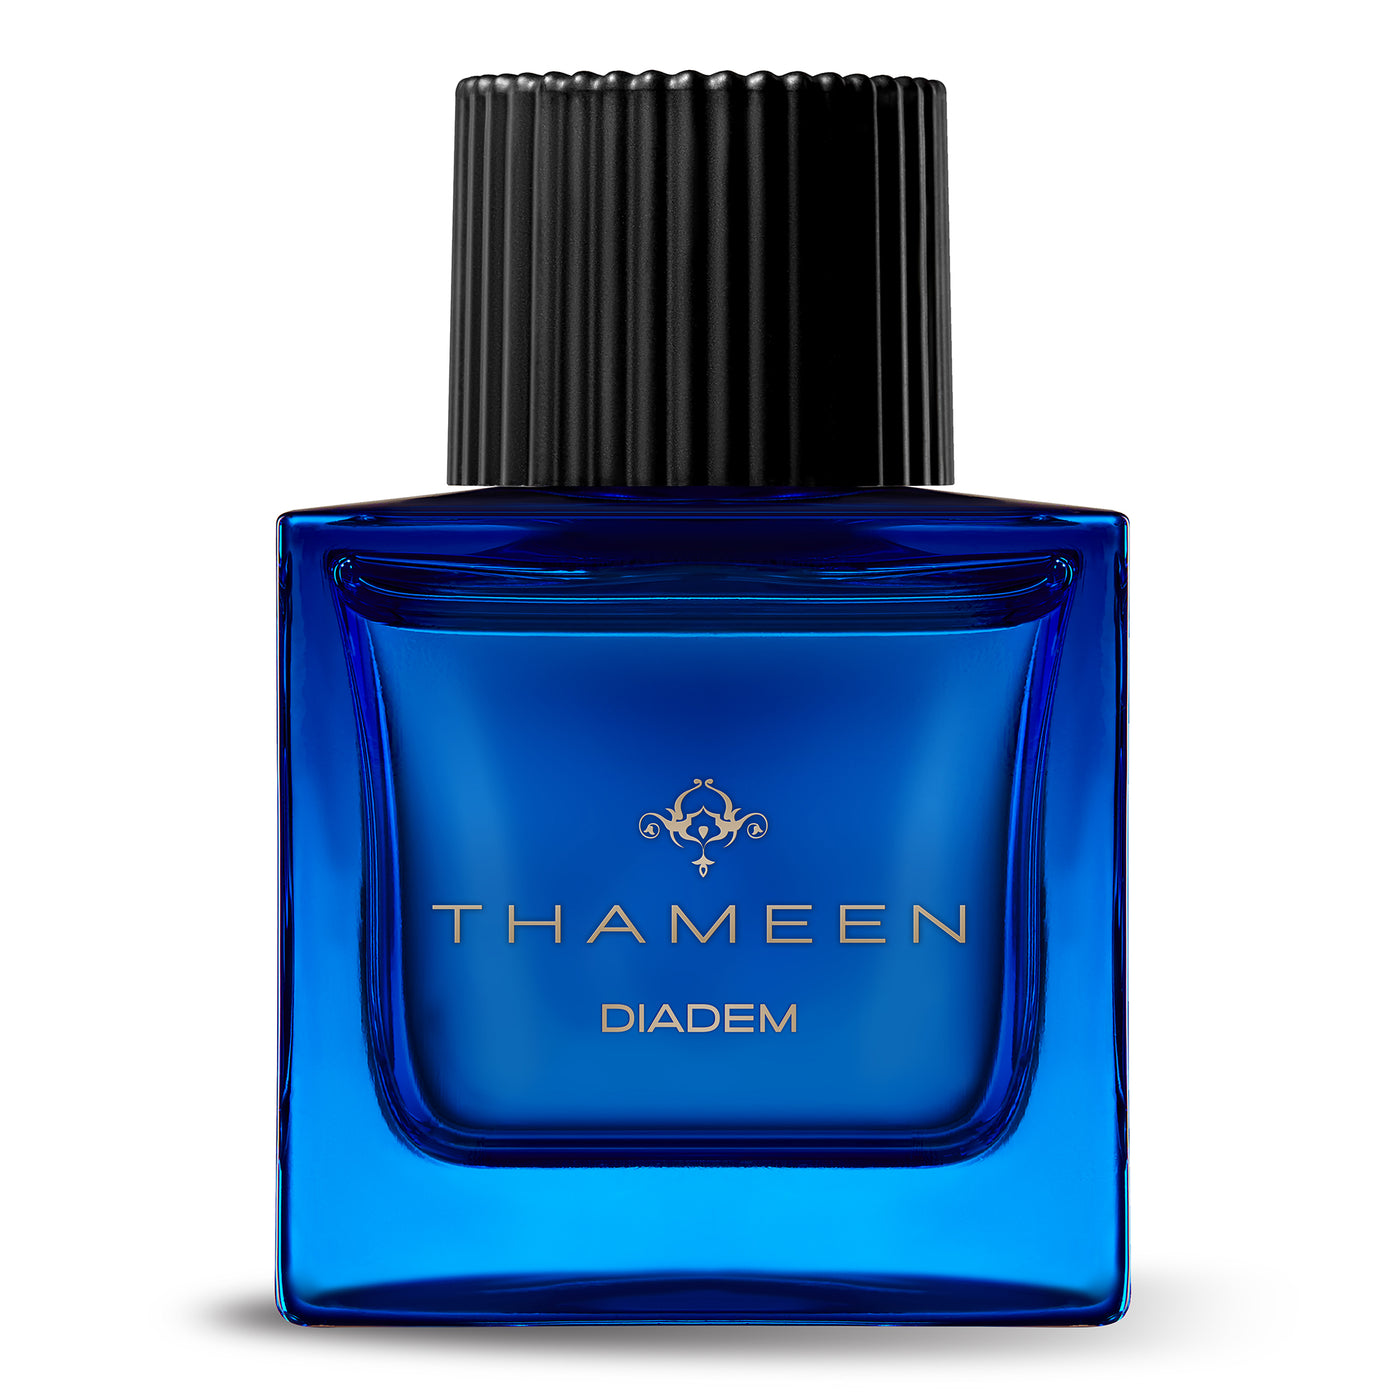 Thameen London Diadem - 50ml - Gharyal by Collectibles 